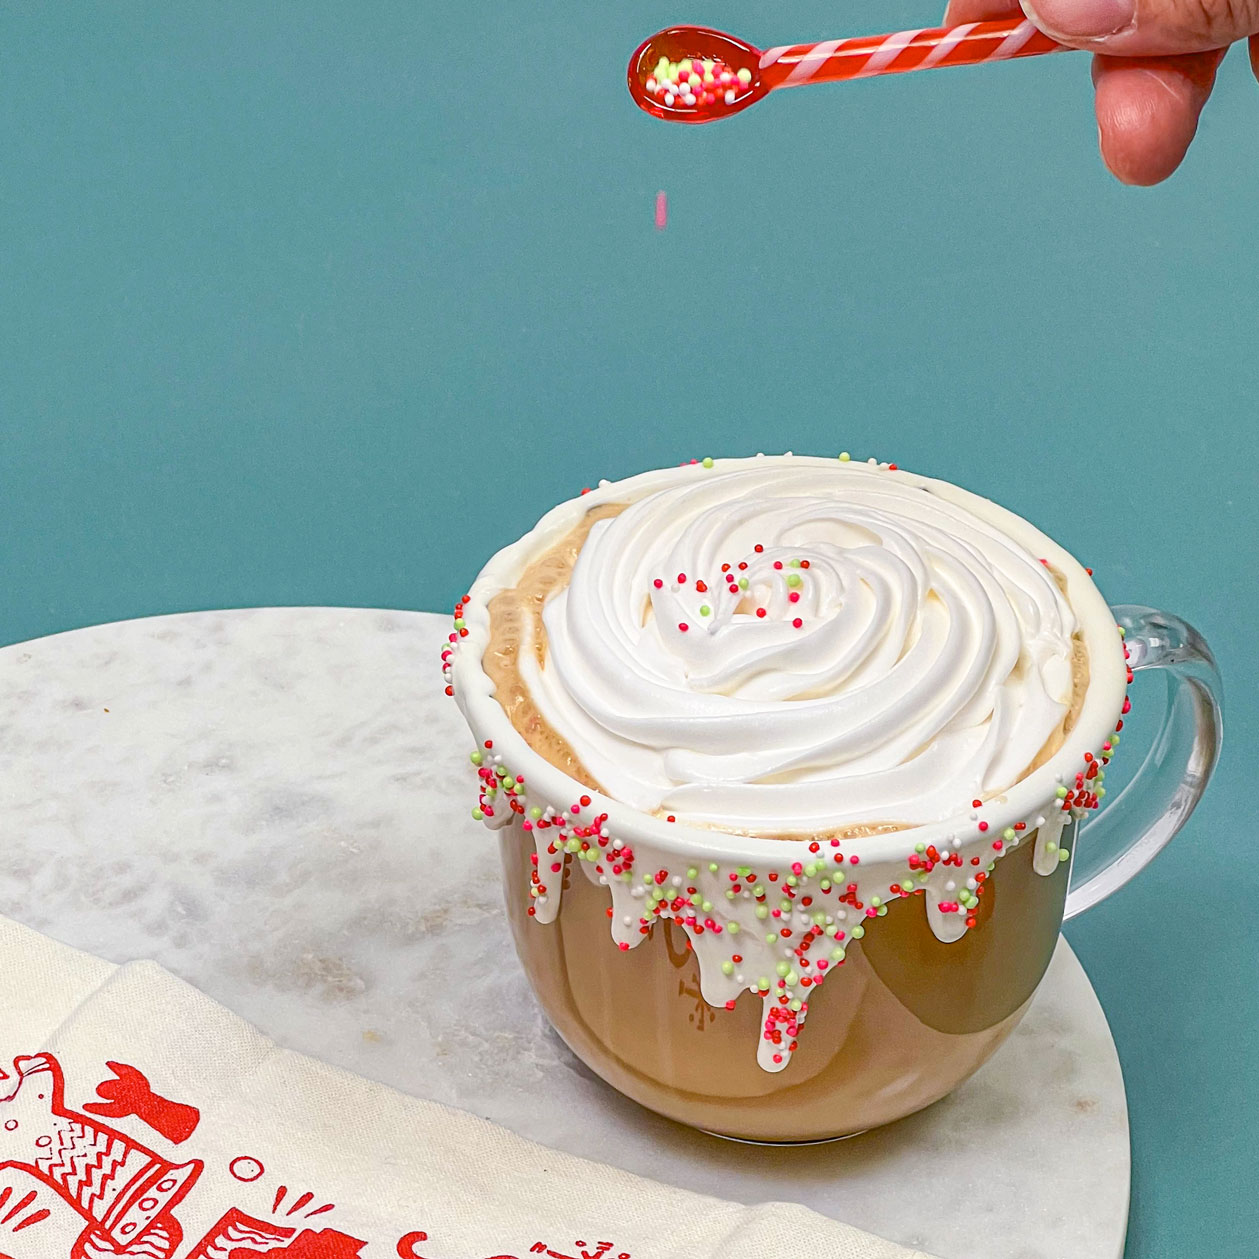 adding sprinkles on top of whipped cream